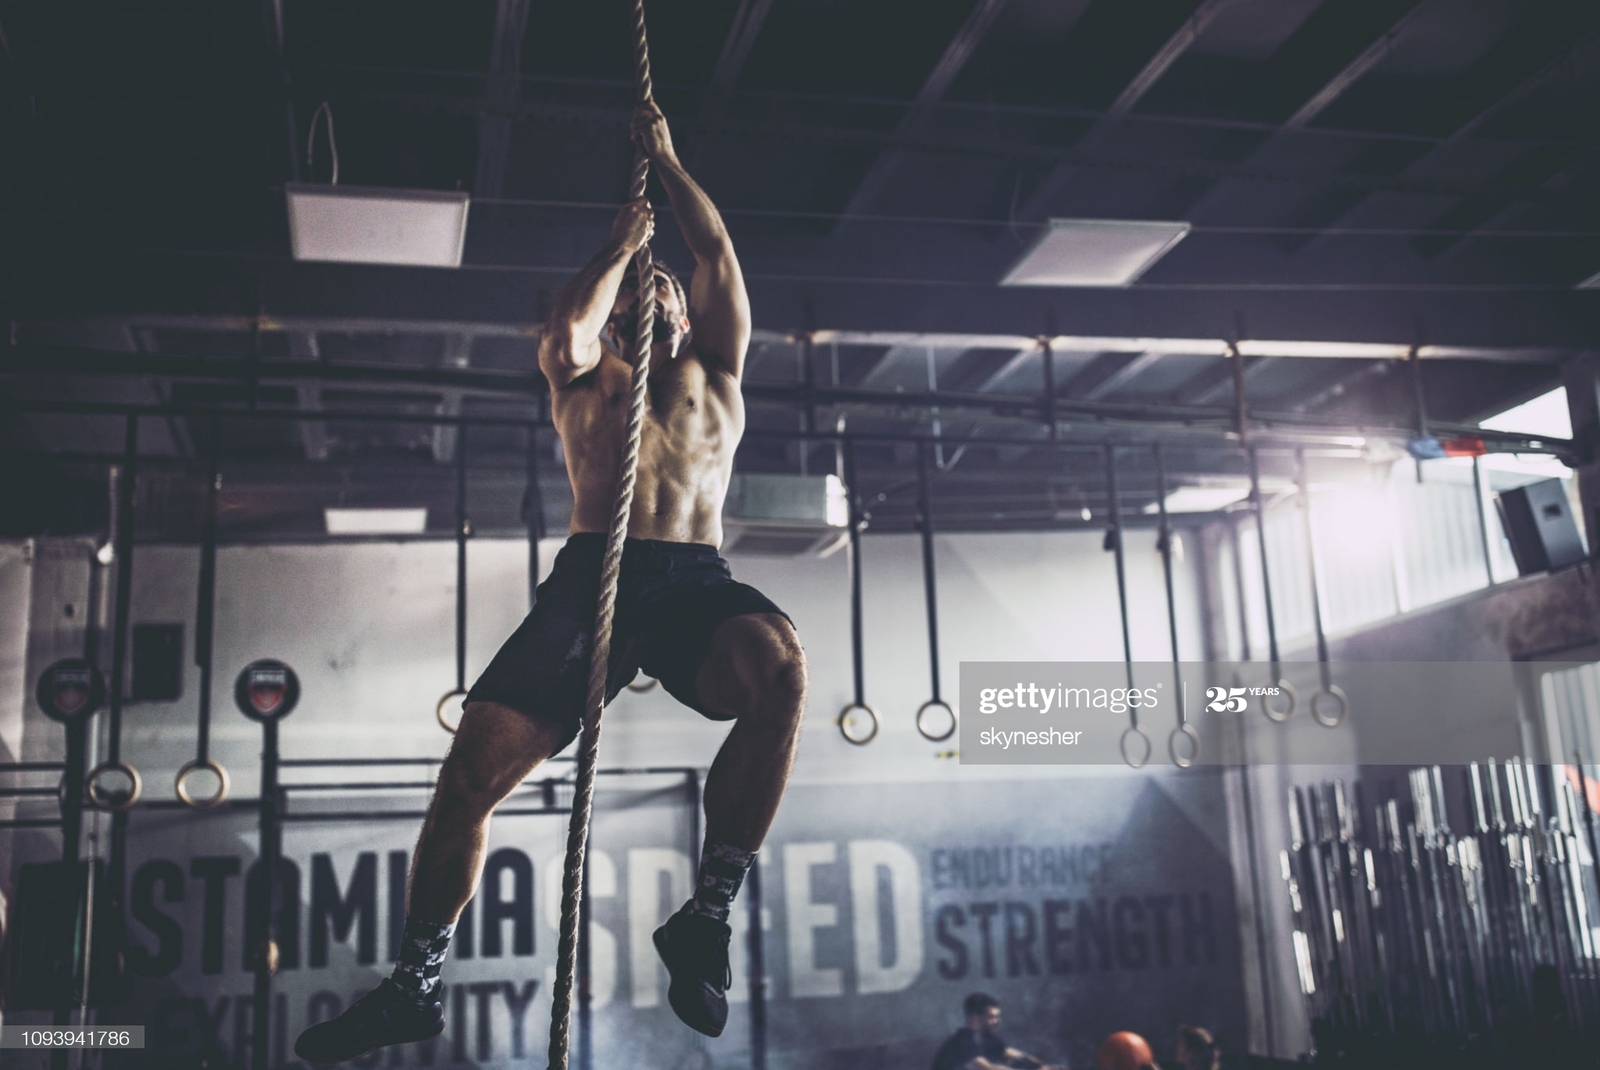 the-rope-in-a-gym-picture-id1093941786?s=2048x2048.jpg